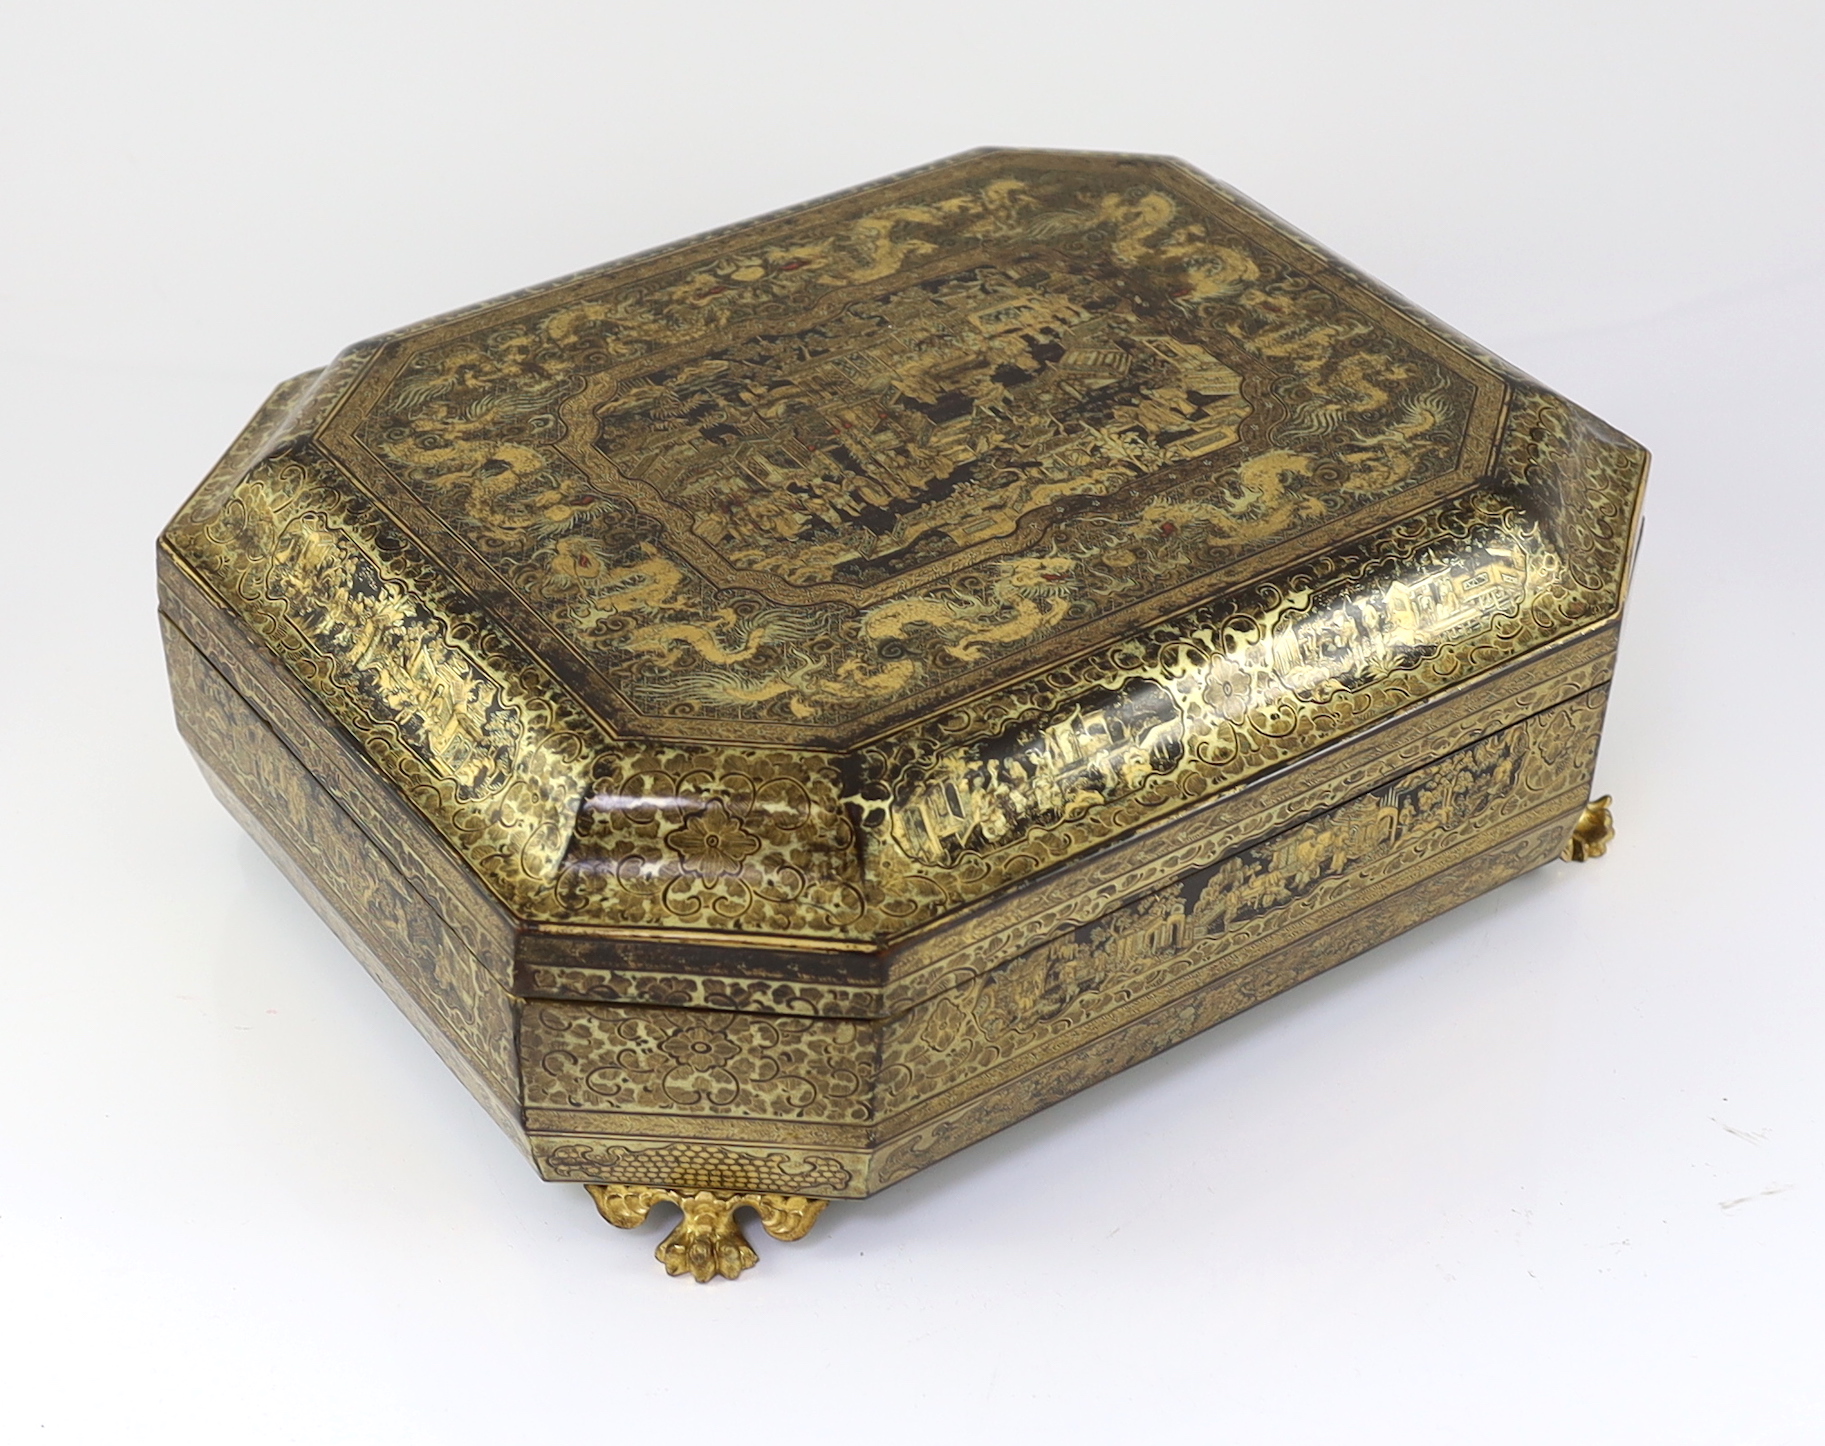 A Chinese Export gilt-decorated black lacquer games box, c.1830, decorated with figures amid - Image 2 of 7